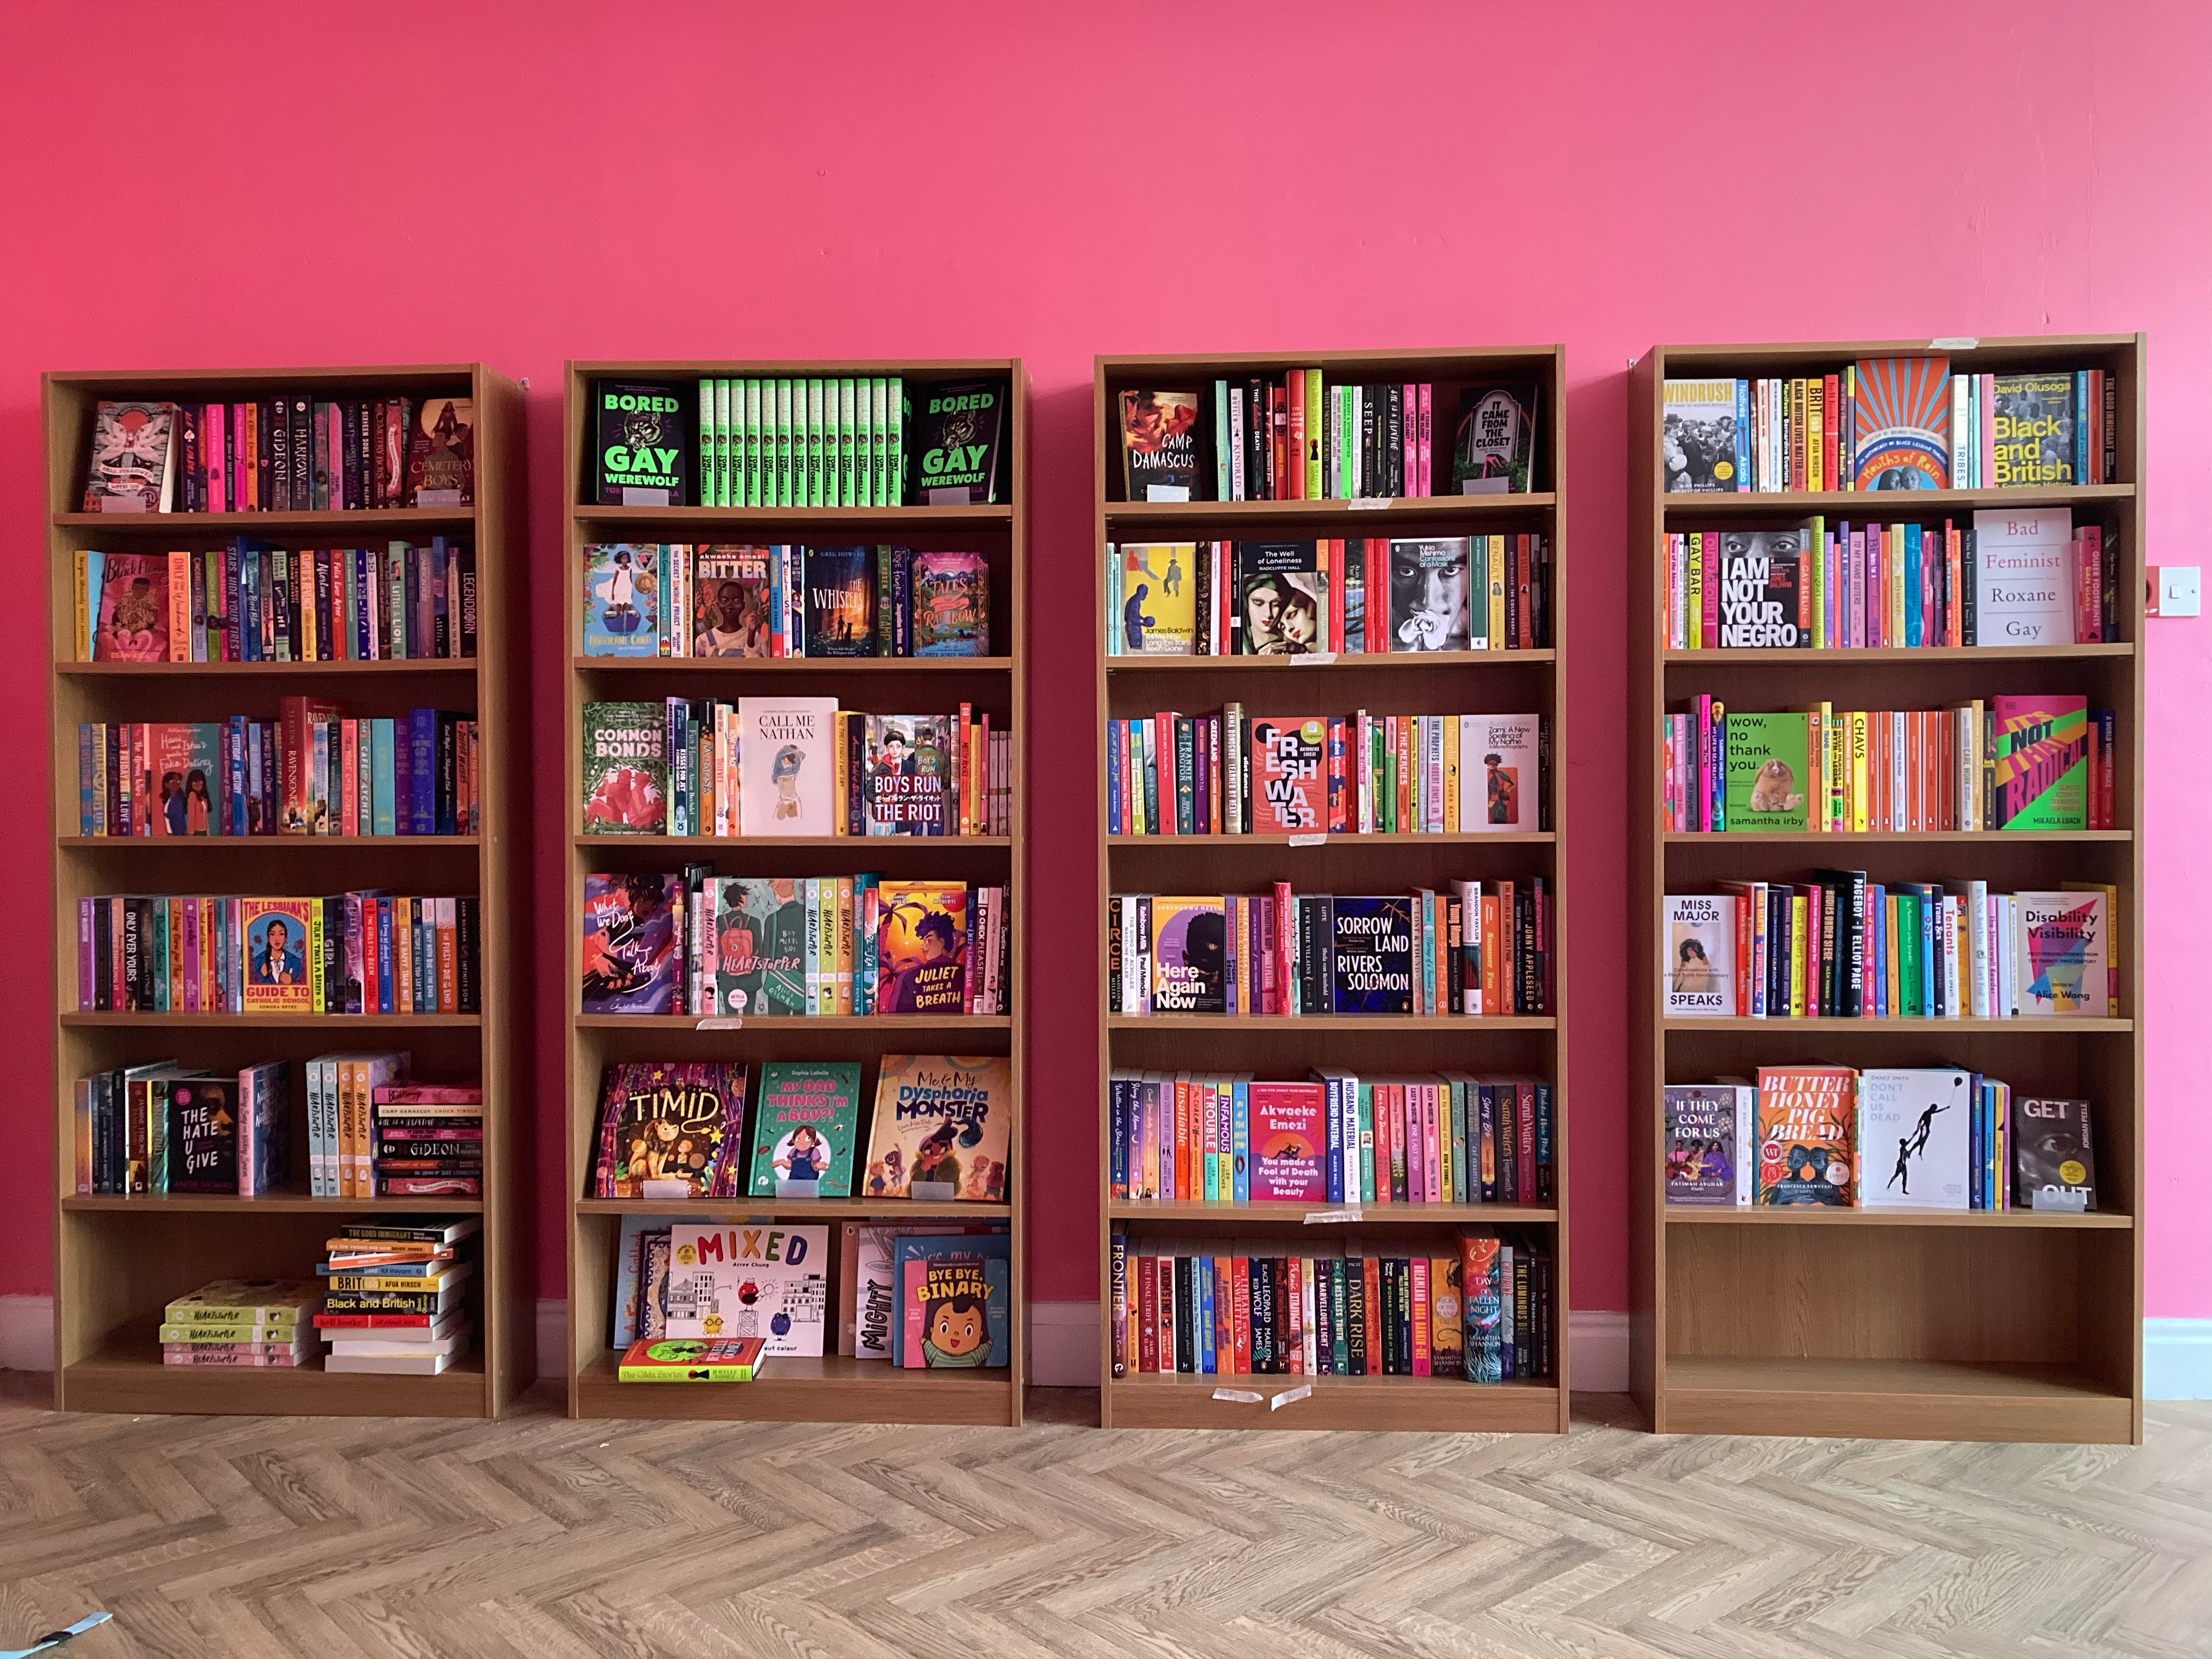 Four oak bookcases filled with queer and radical books stand against a bright pink wall.